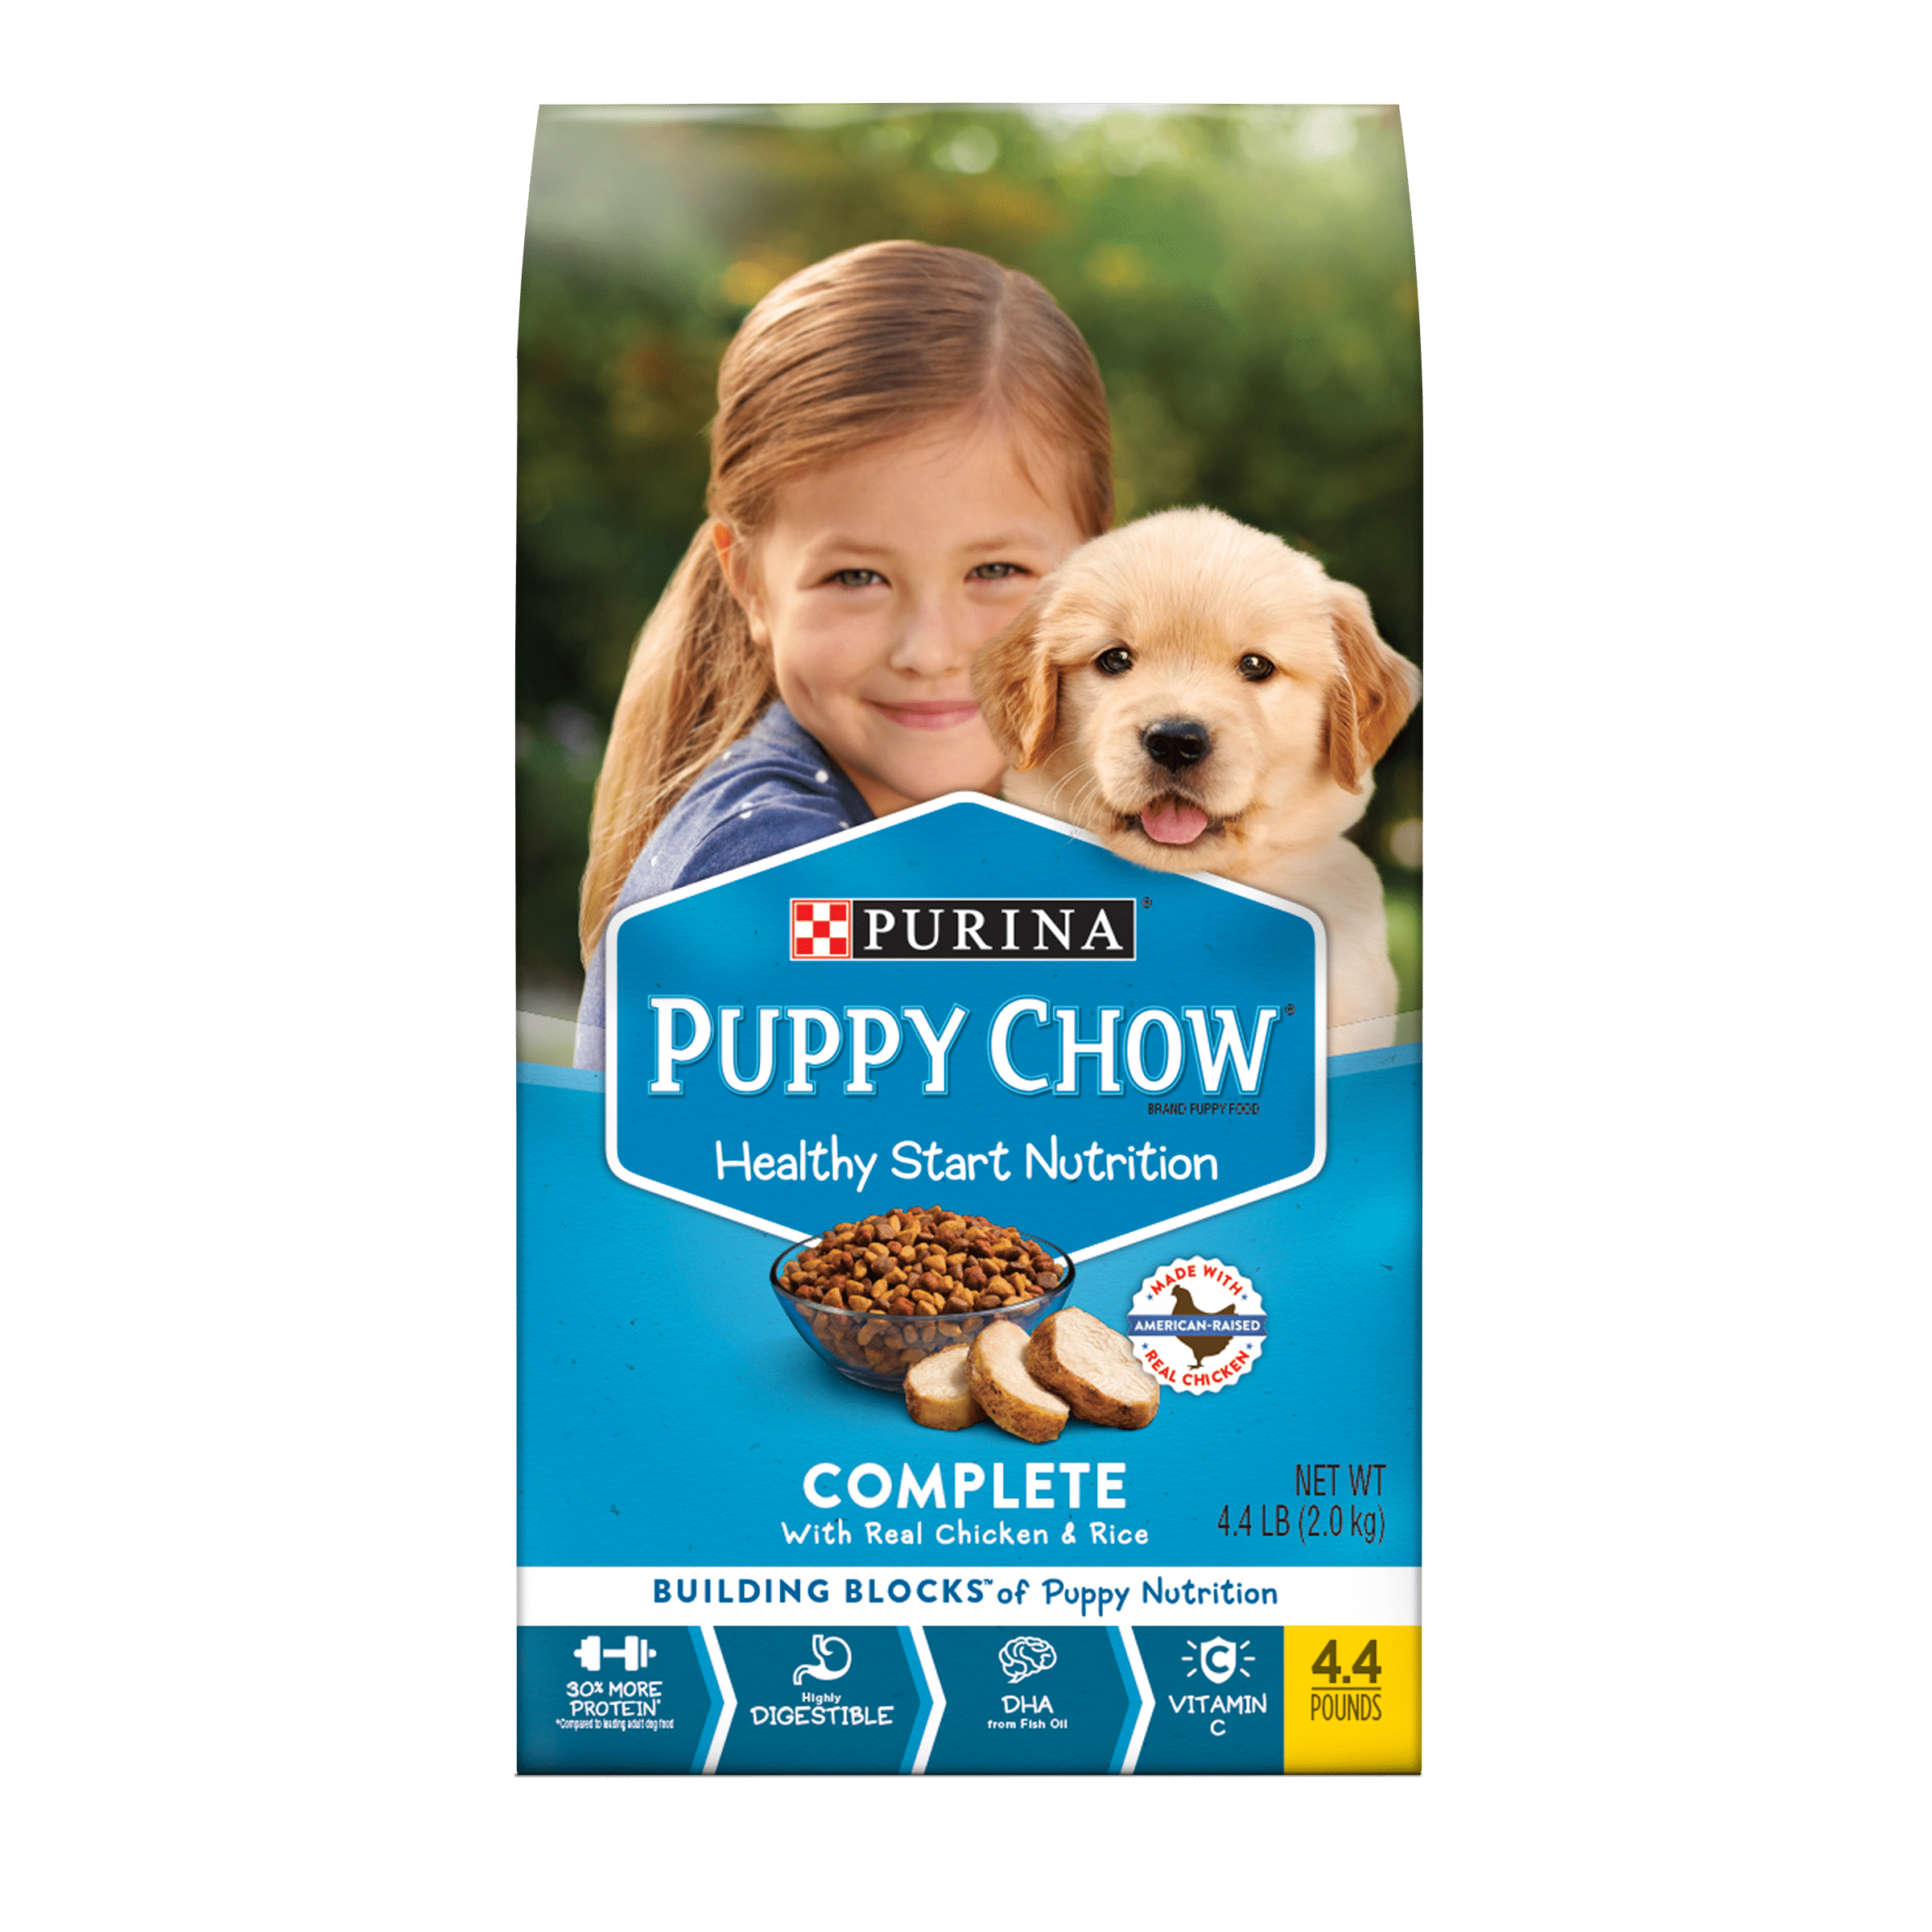 Purina Puppy Chow High Protein Dry Puppy Food, Complete With Real